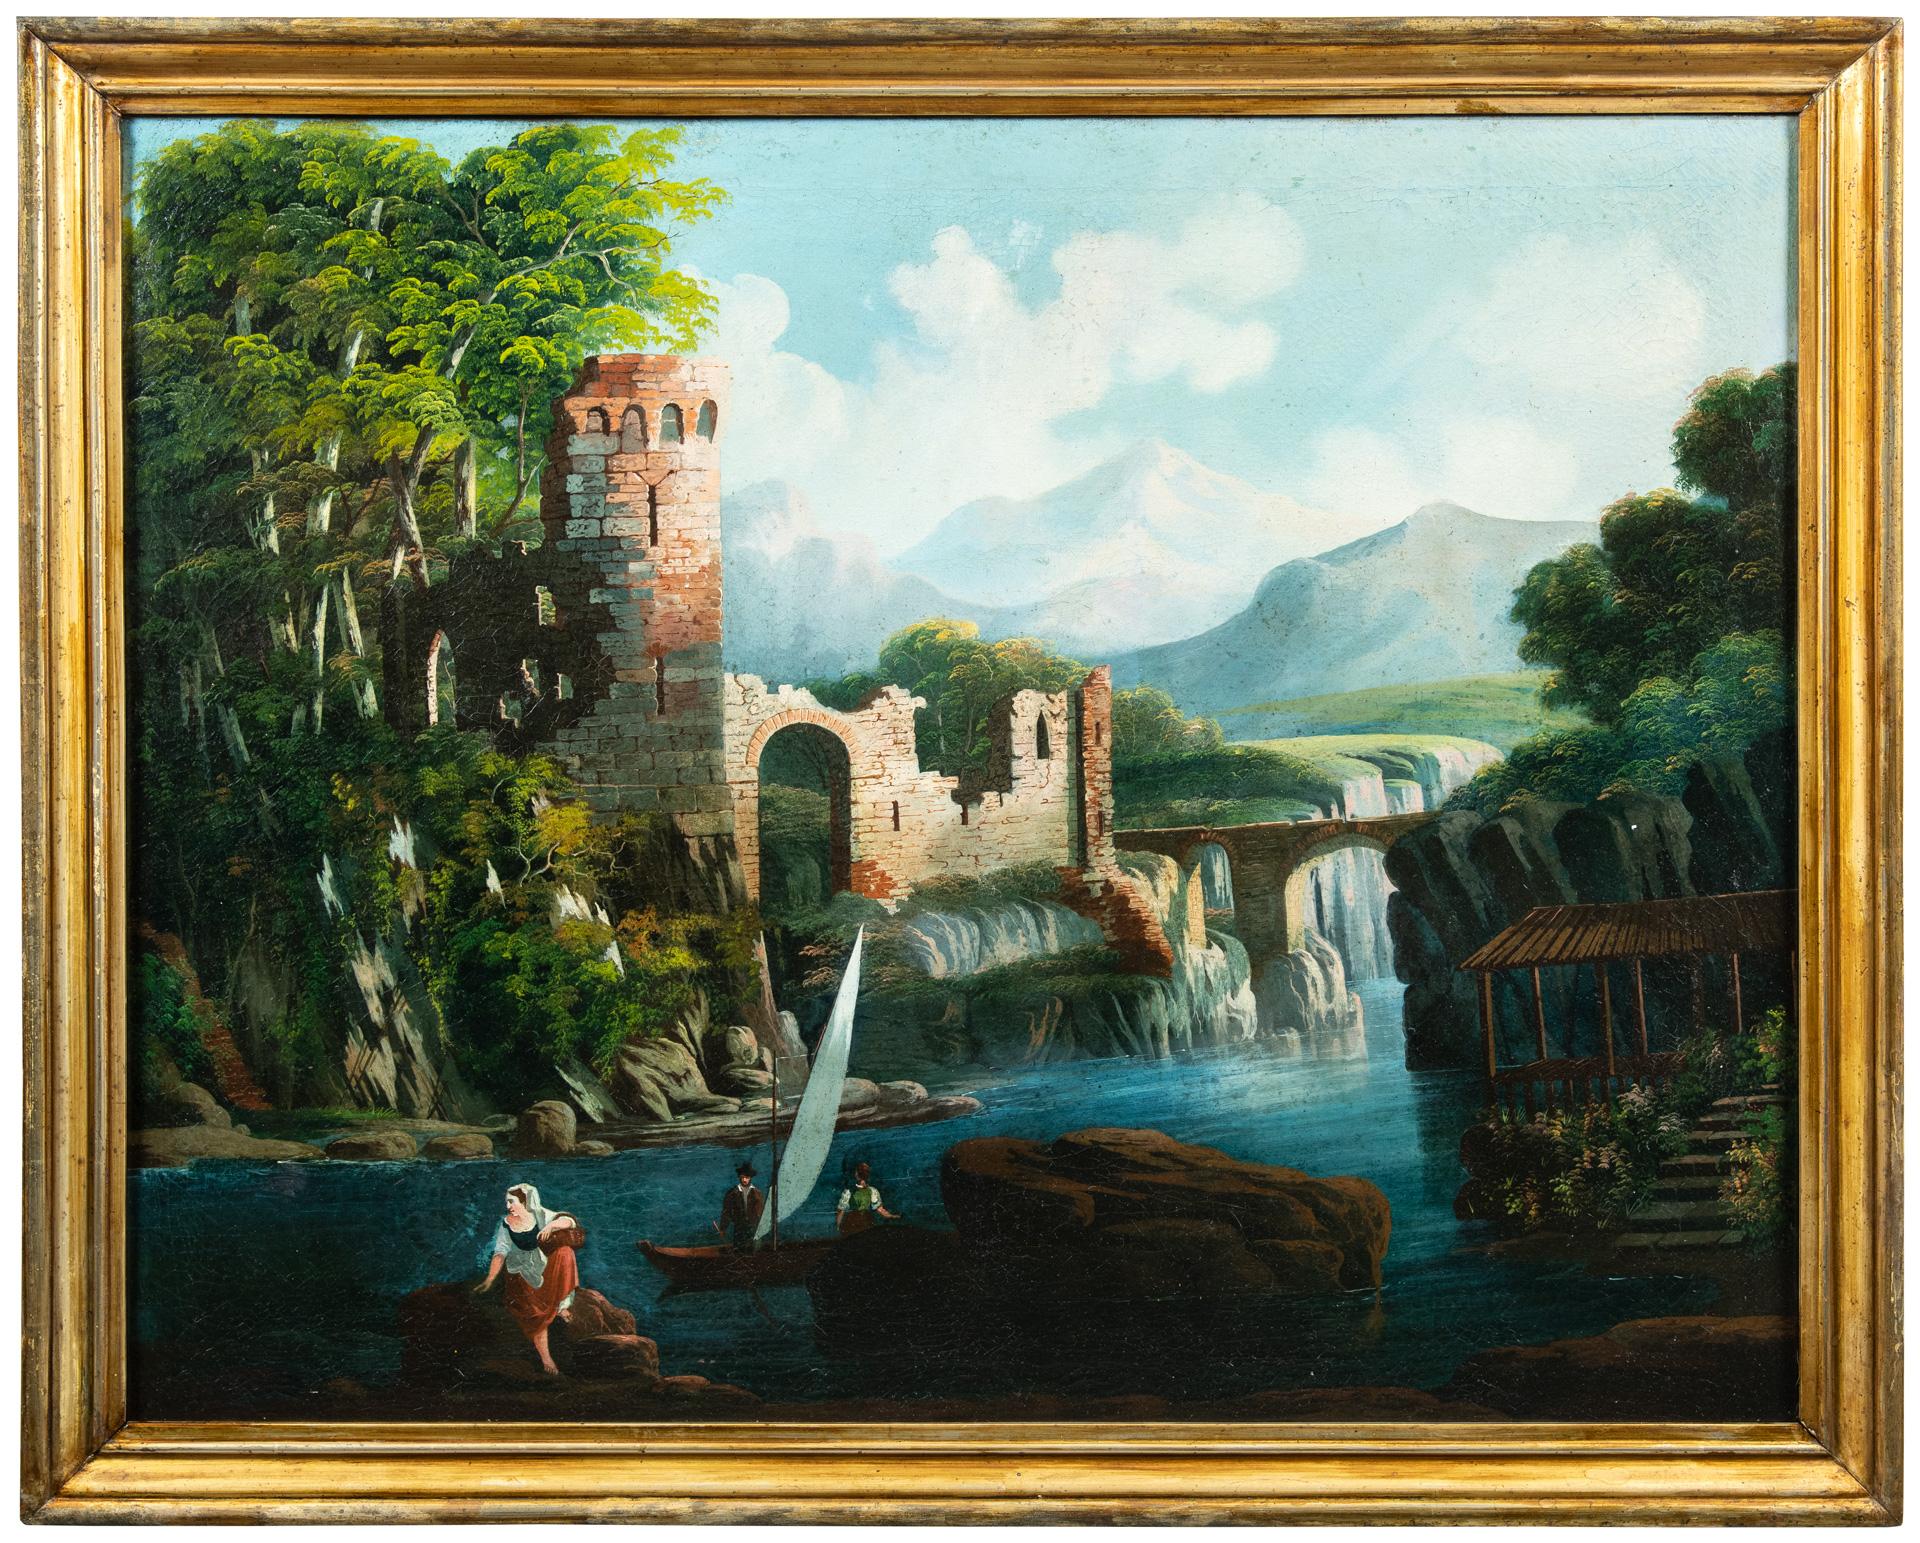 18-19th century Italian figure painting - River landscape - Oil on canvas Italy